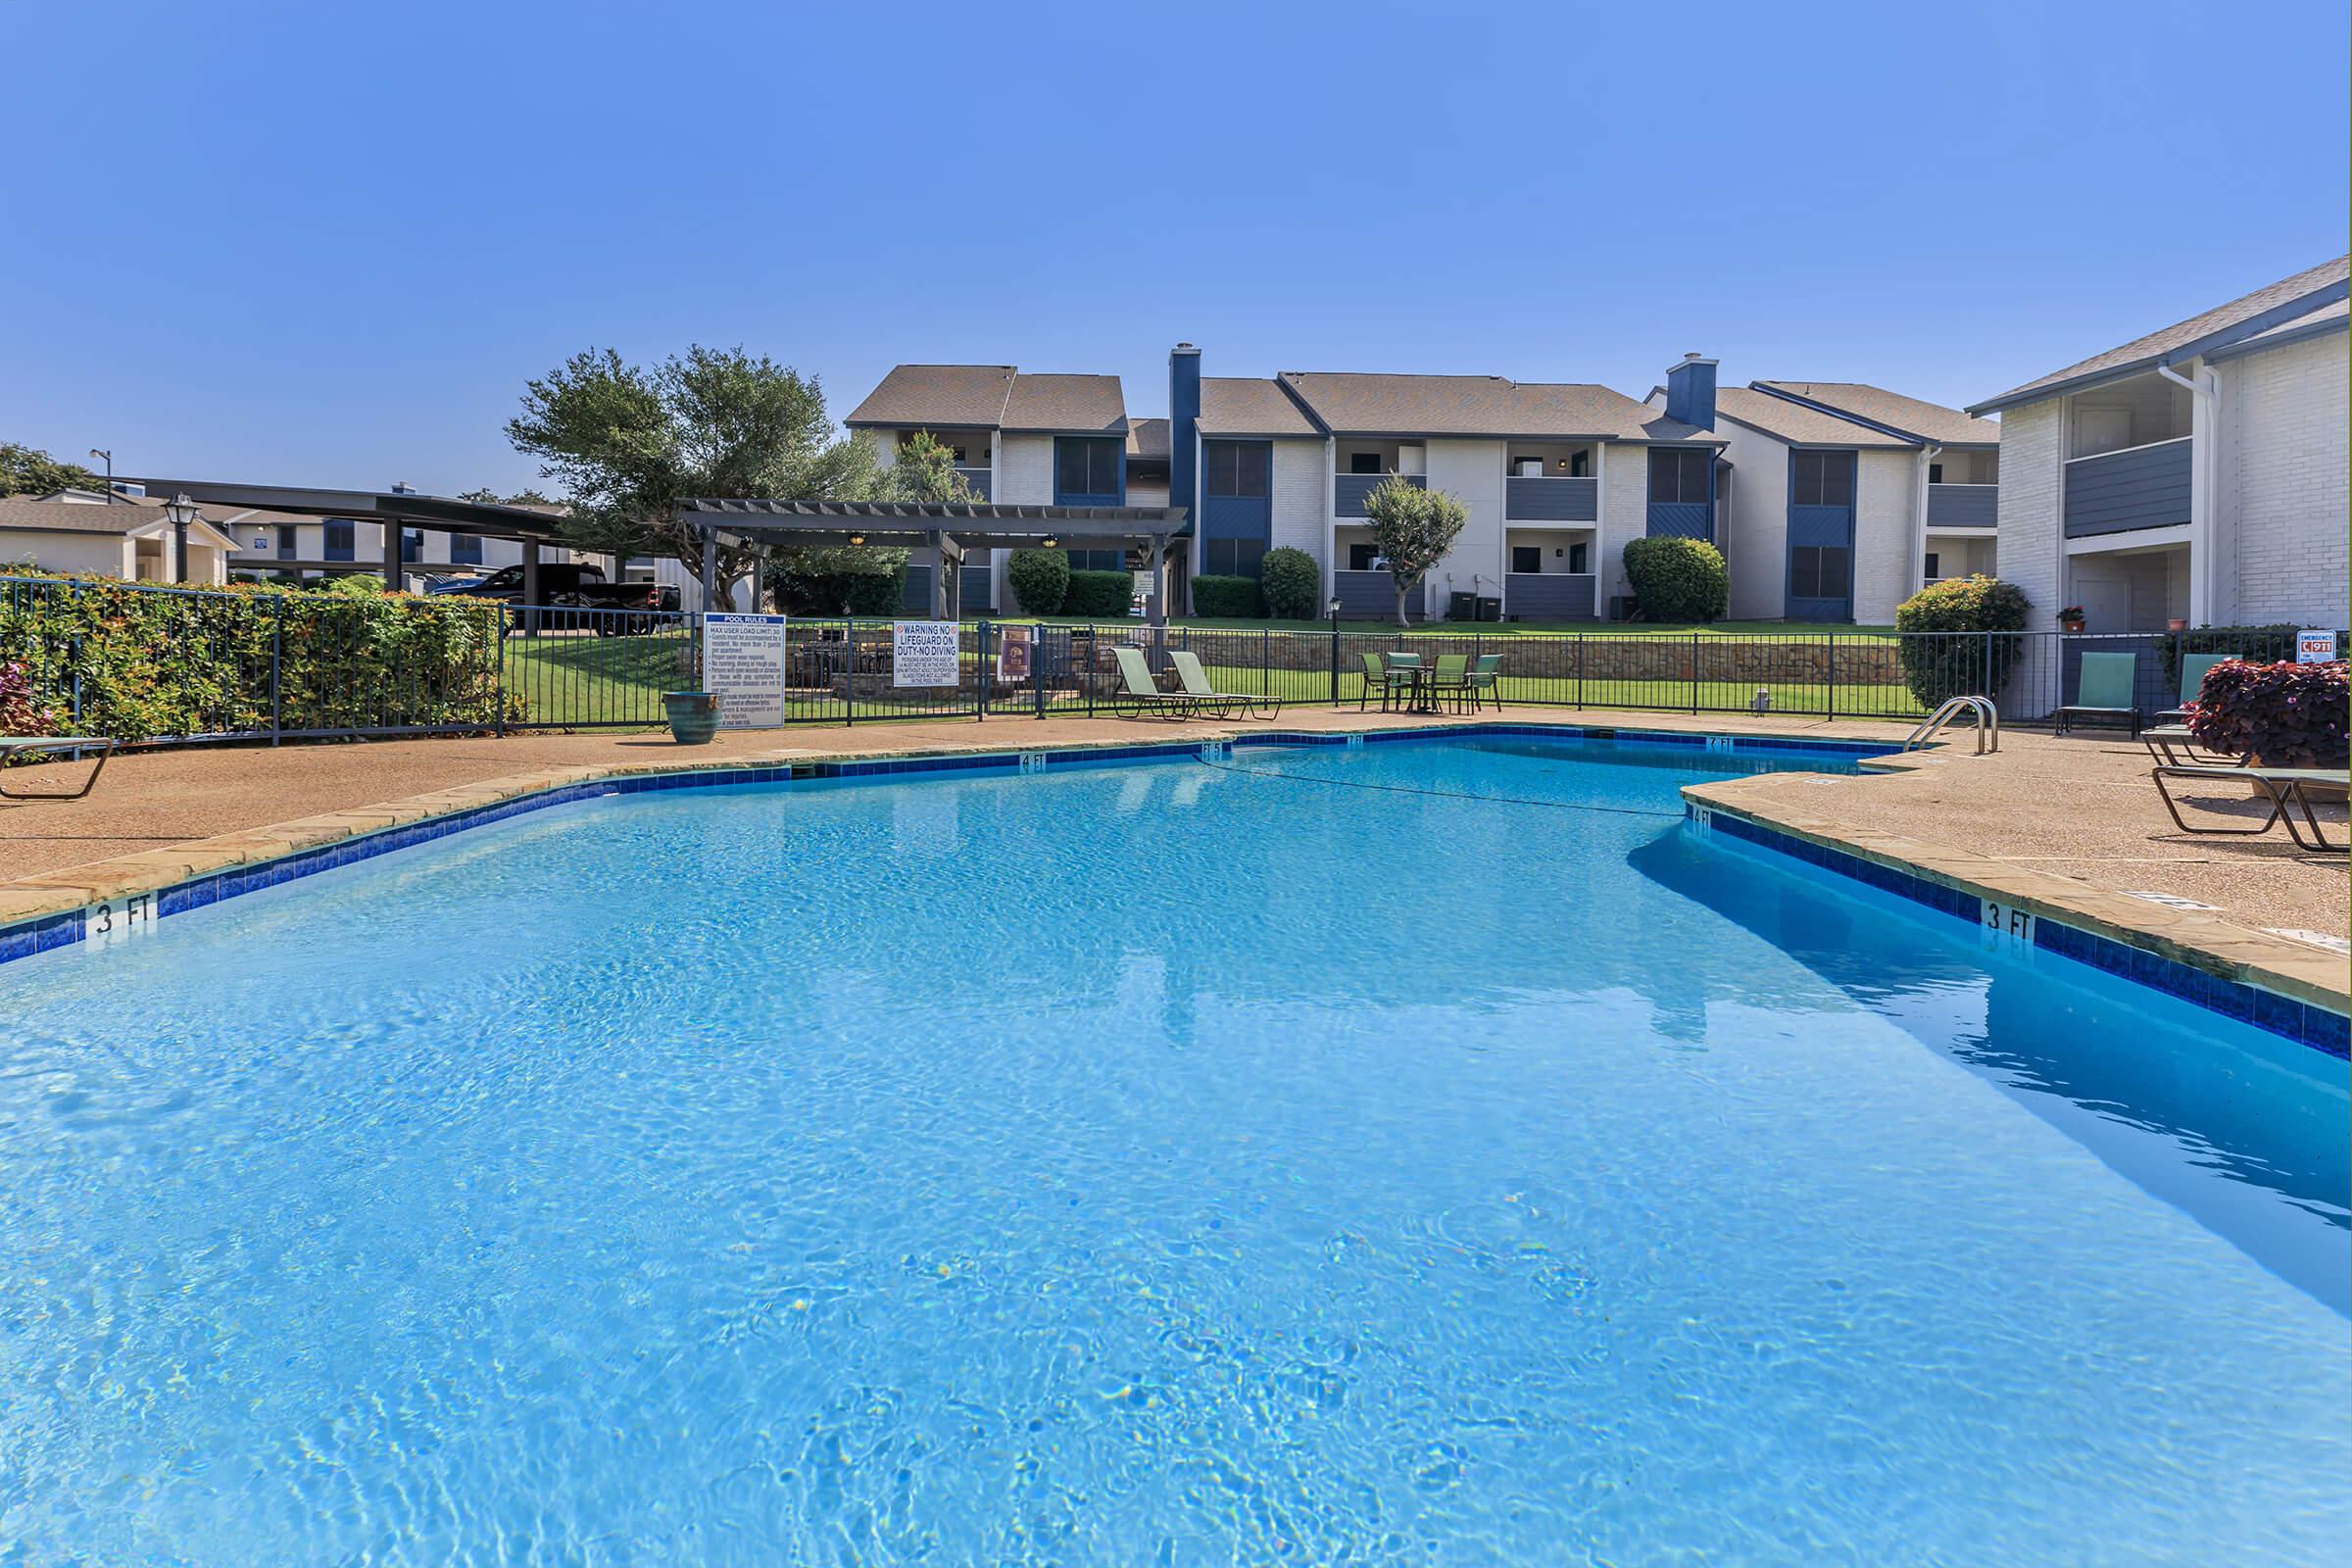 Rise Oak Creek's large dazzling pool with loungers surrounded by the apartments.